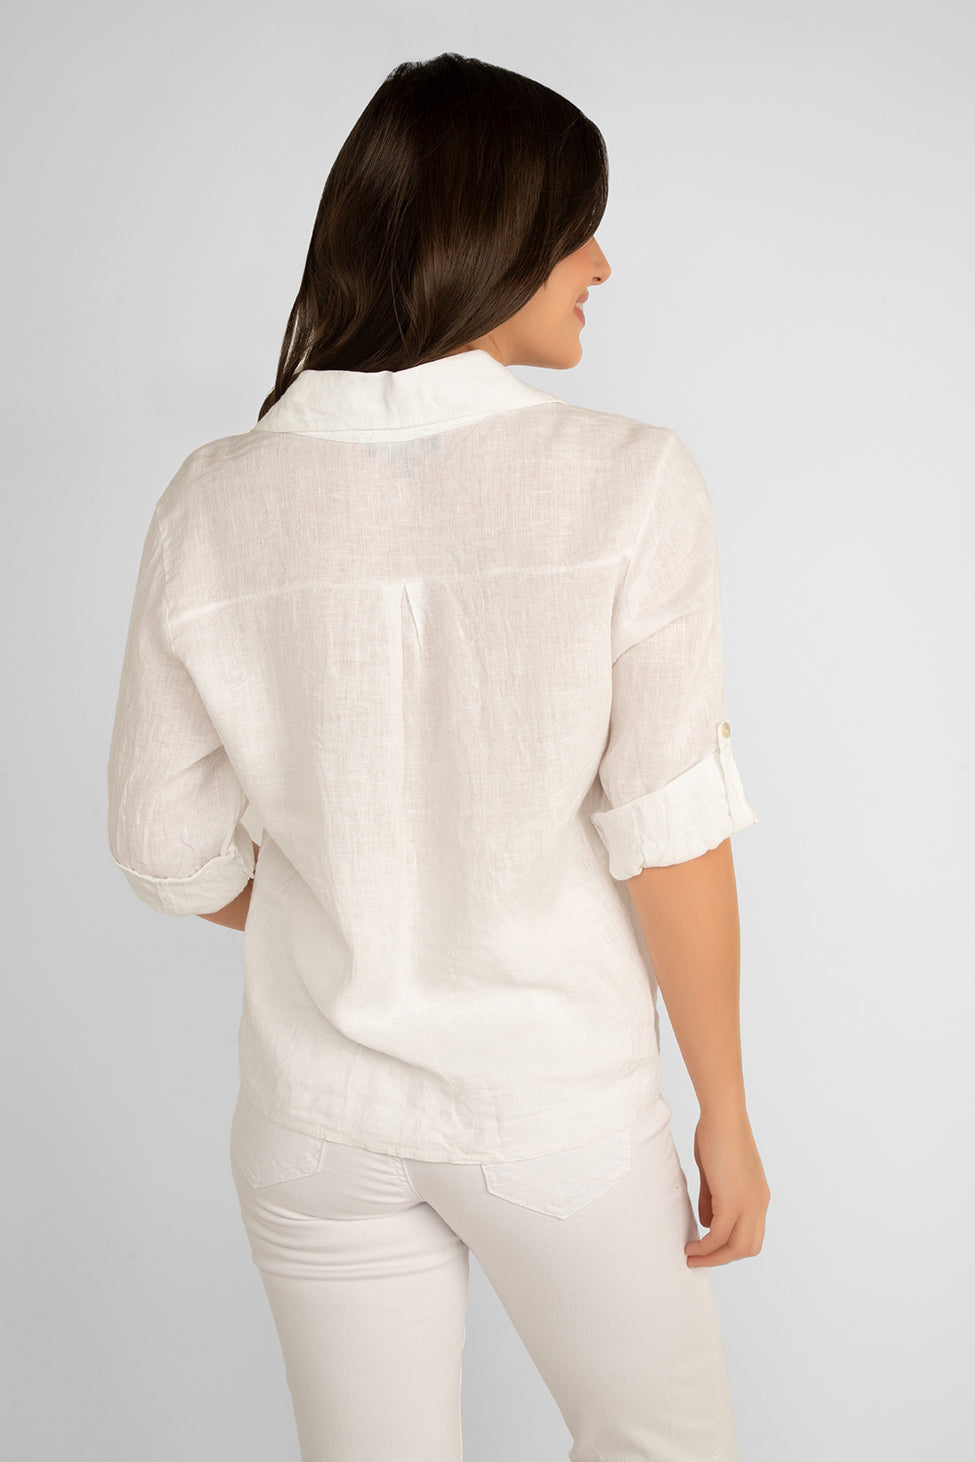 Back view of Carre Noir (6947) Women's 3/4 Sleeve Button Up Shirt with Front Tie and Shirt Collar in White